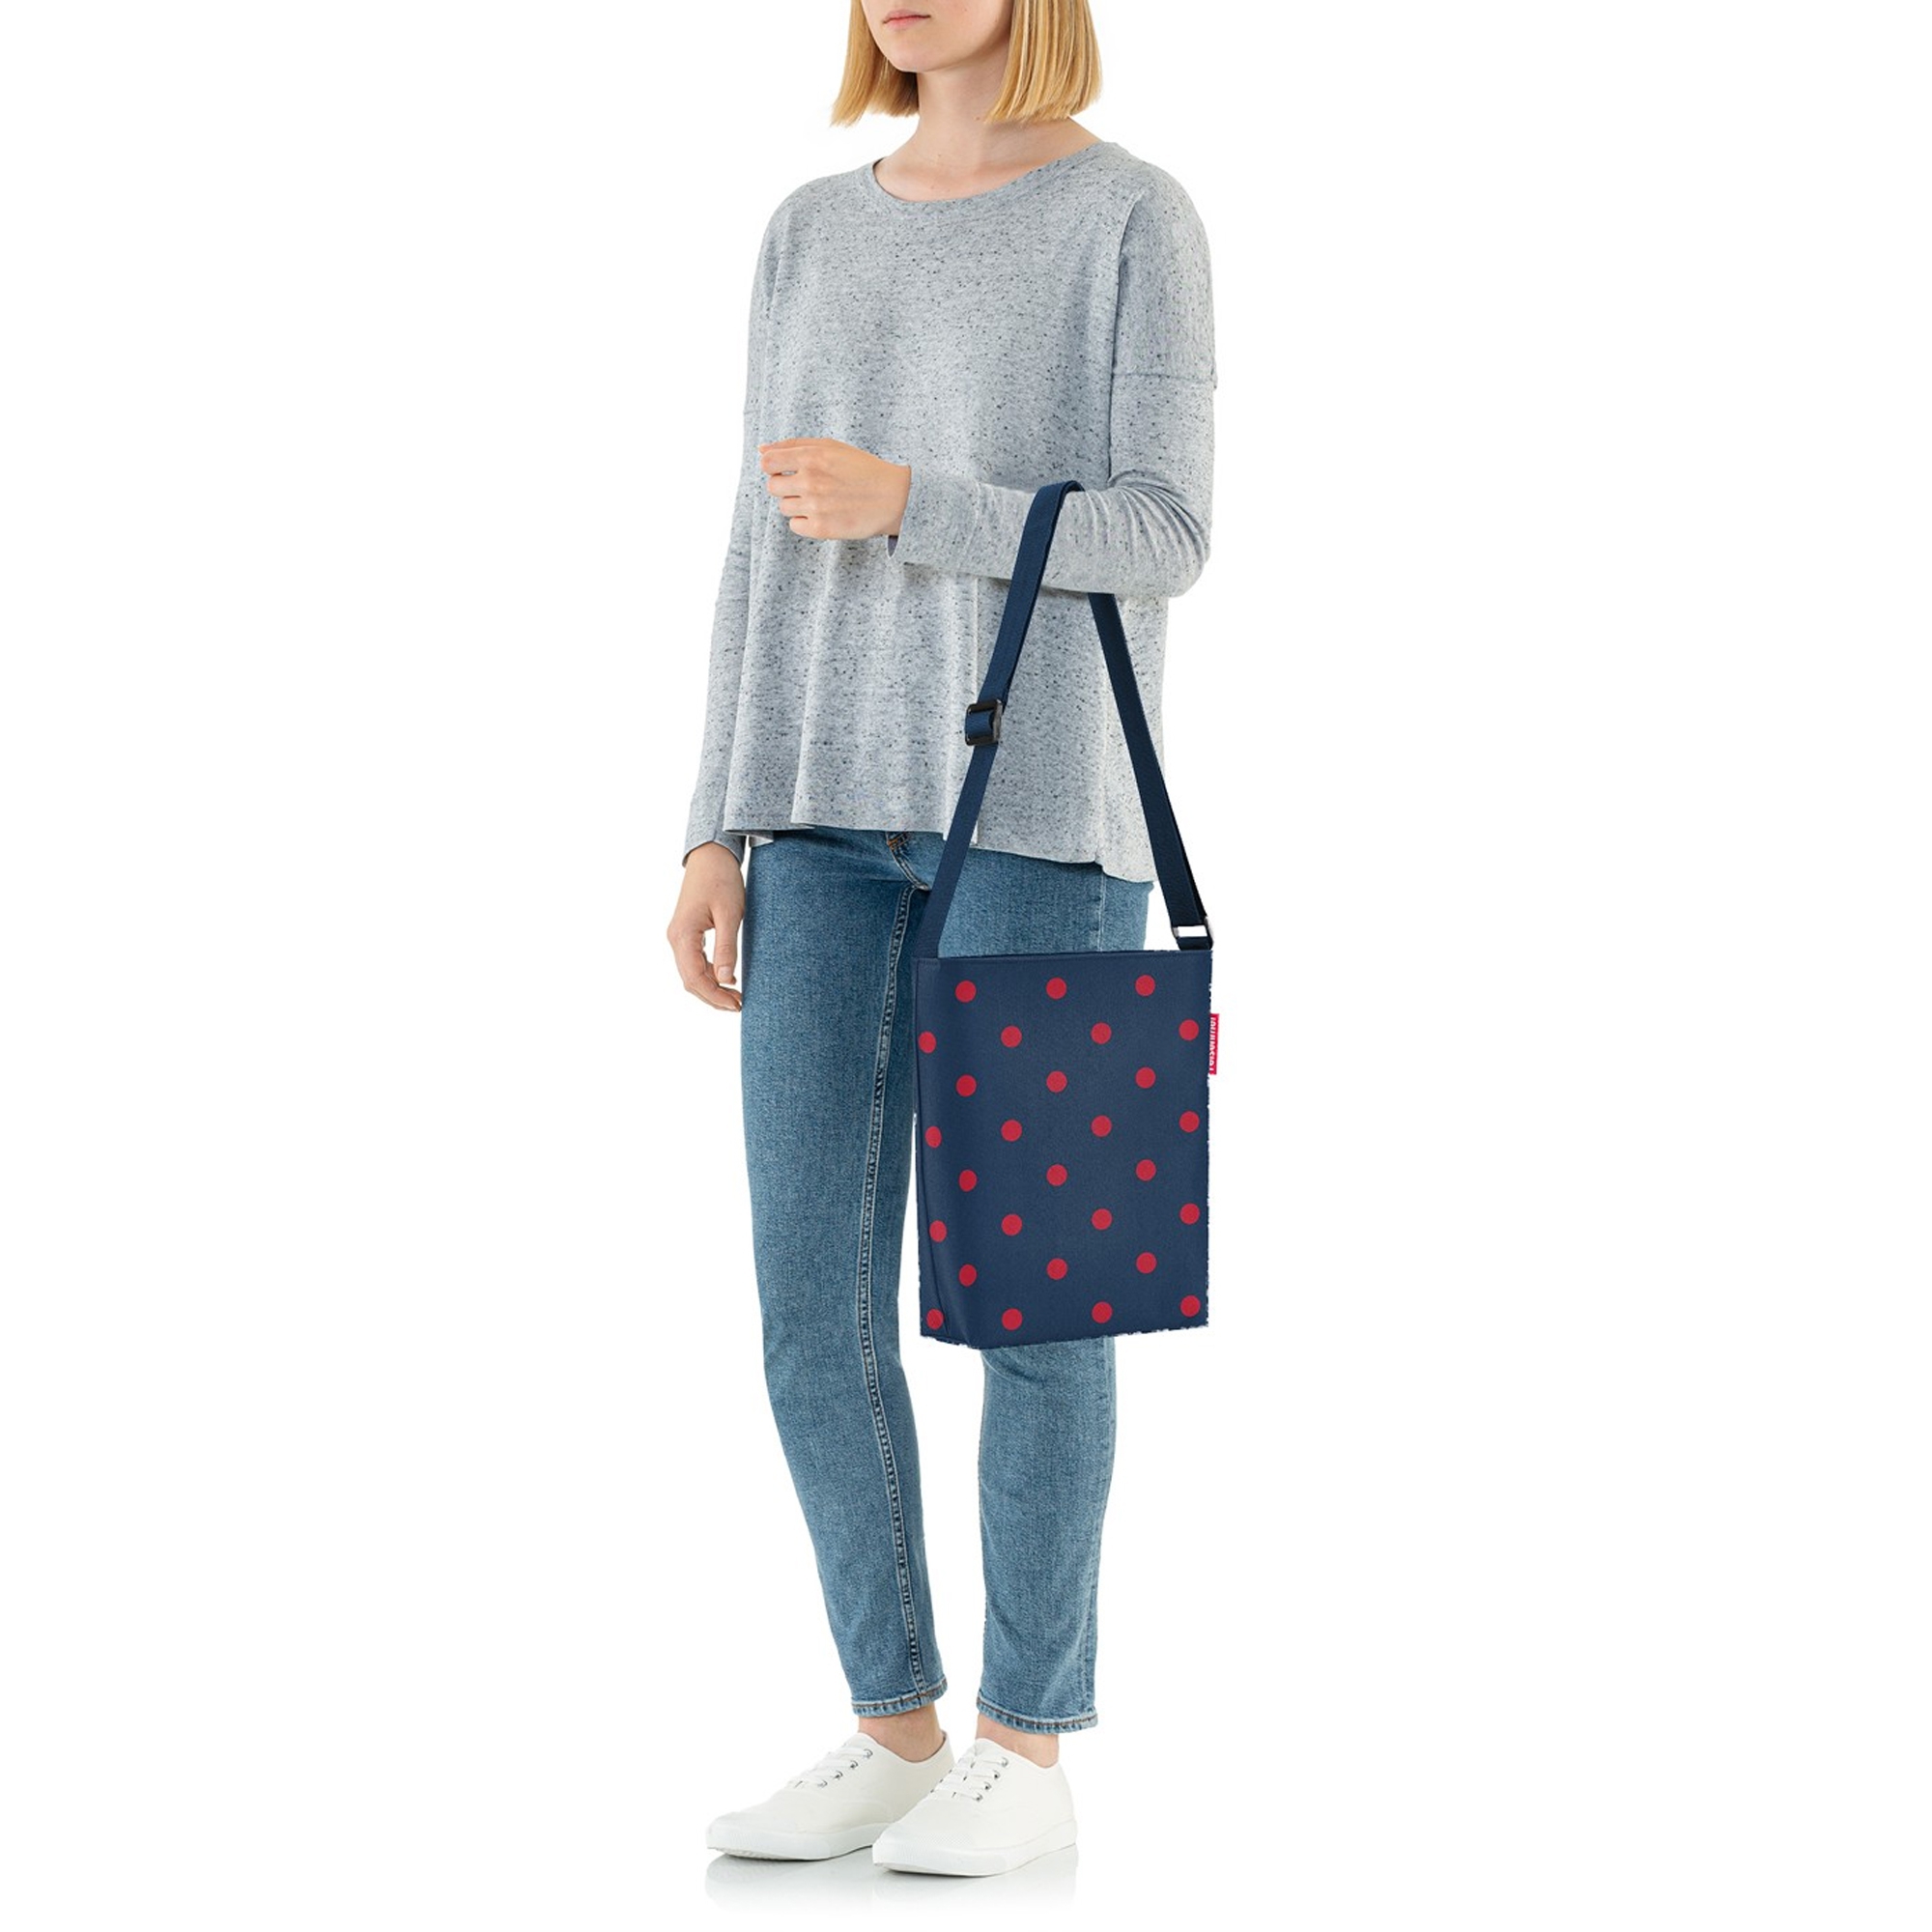 reisenthel - shoulderbag S - mixed dots red